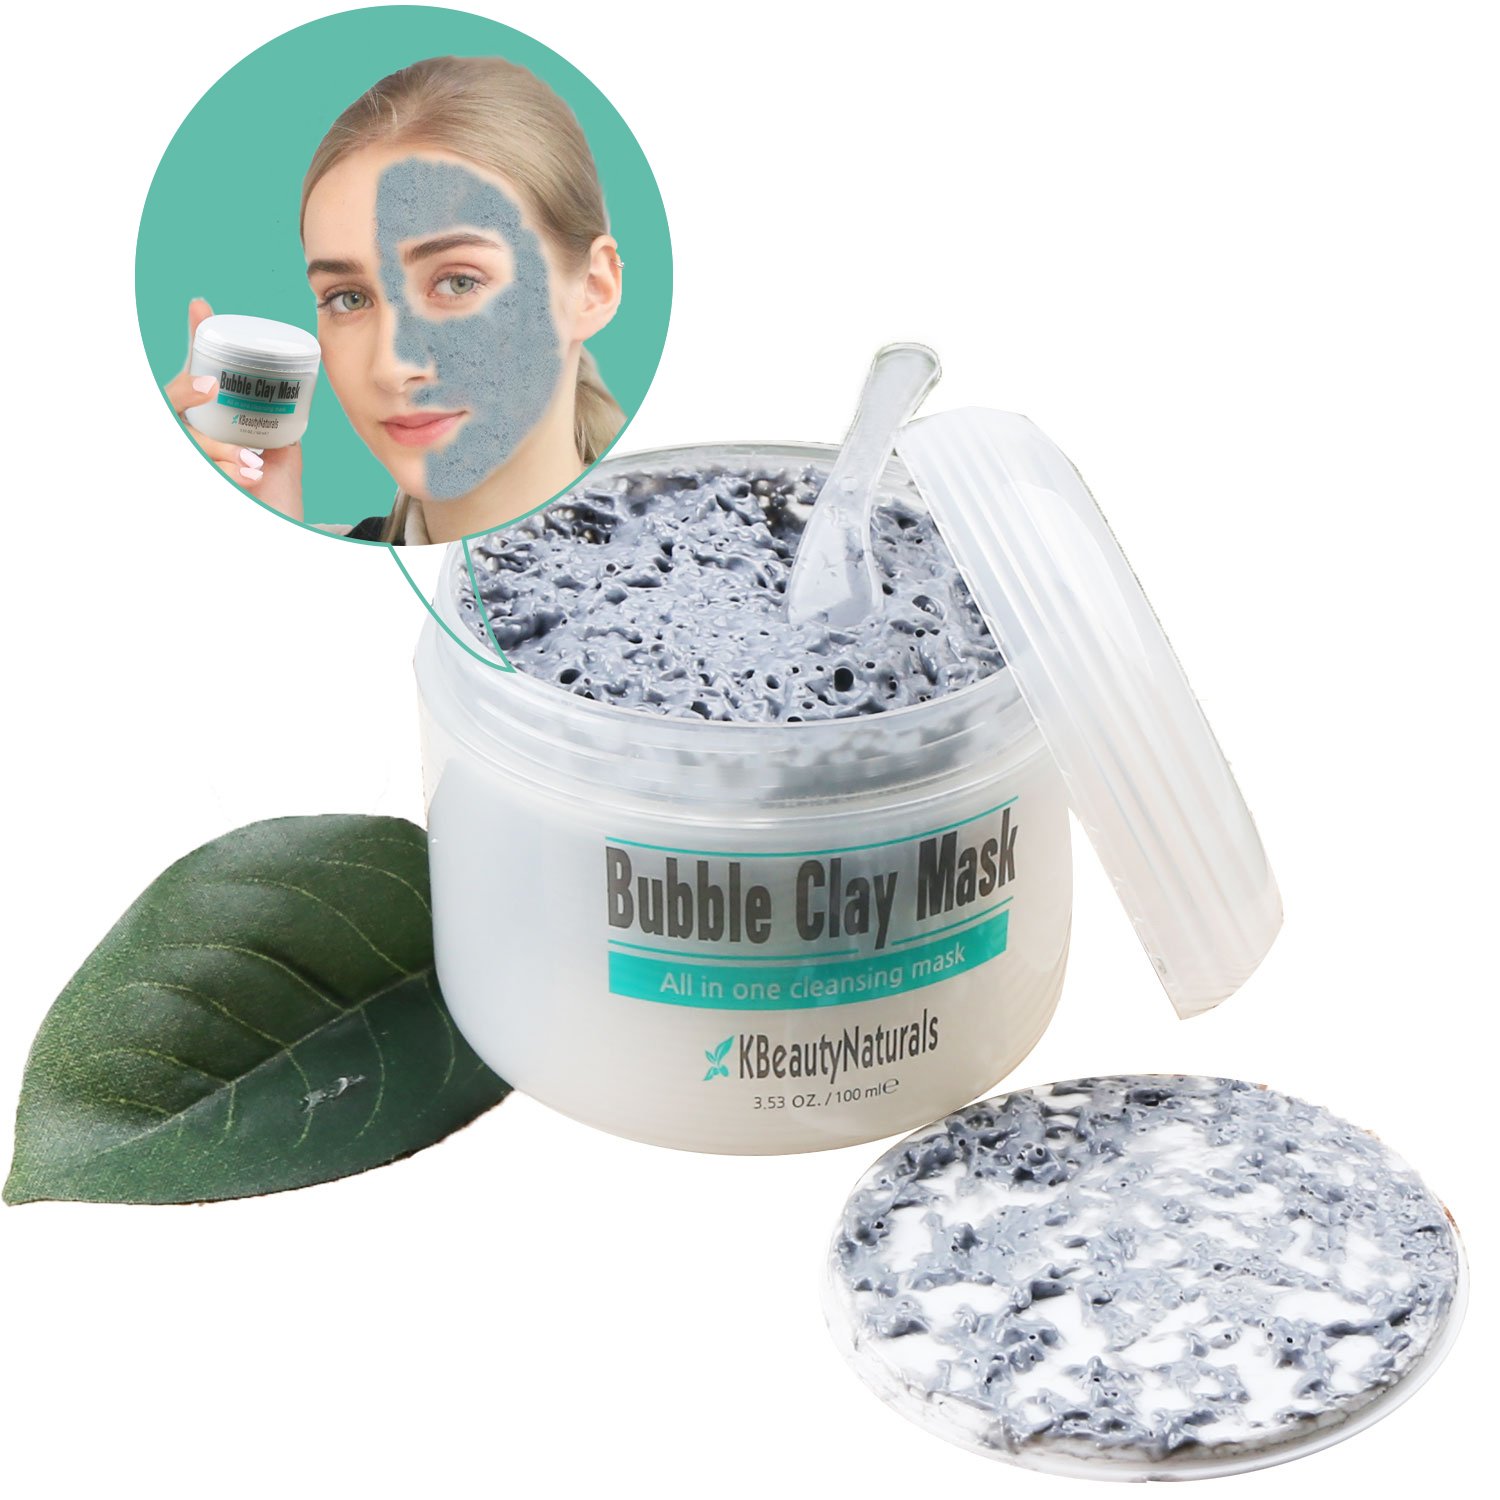 KBeautyNaturals | Carbonated Bubble Clay Mask 3.53oz | Beautiful Irish Skin, Leaving your Skin soft and Growing. Great feeling bubble enables your skin great again. Made In Korea